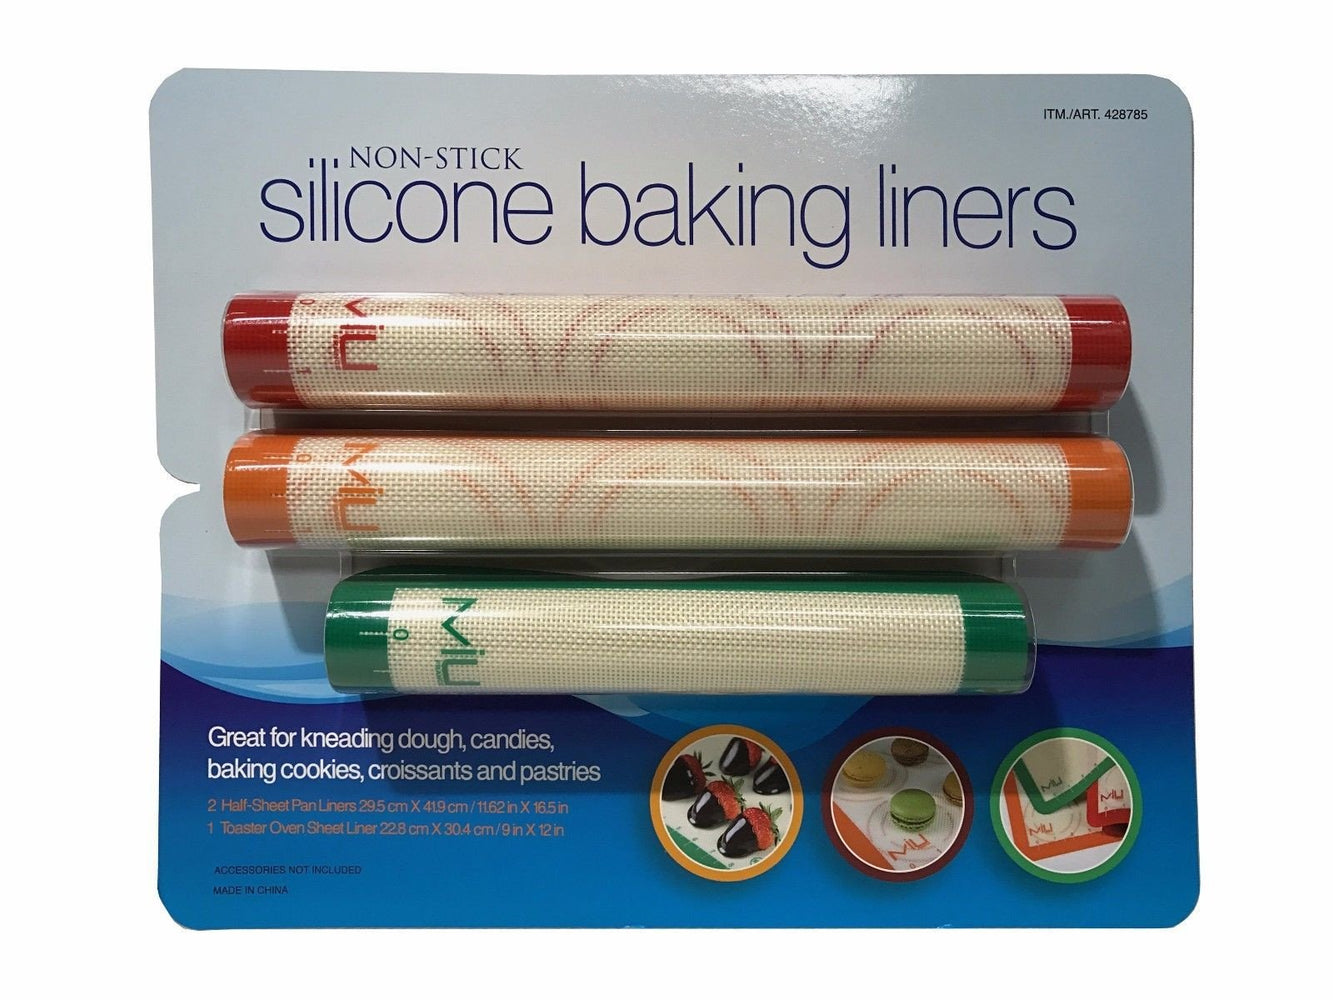 MIU Non-Stick Silicon Baking Liners 3 Pack